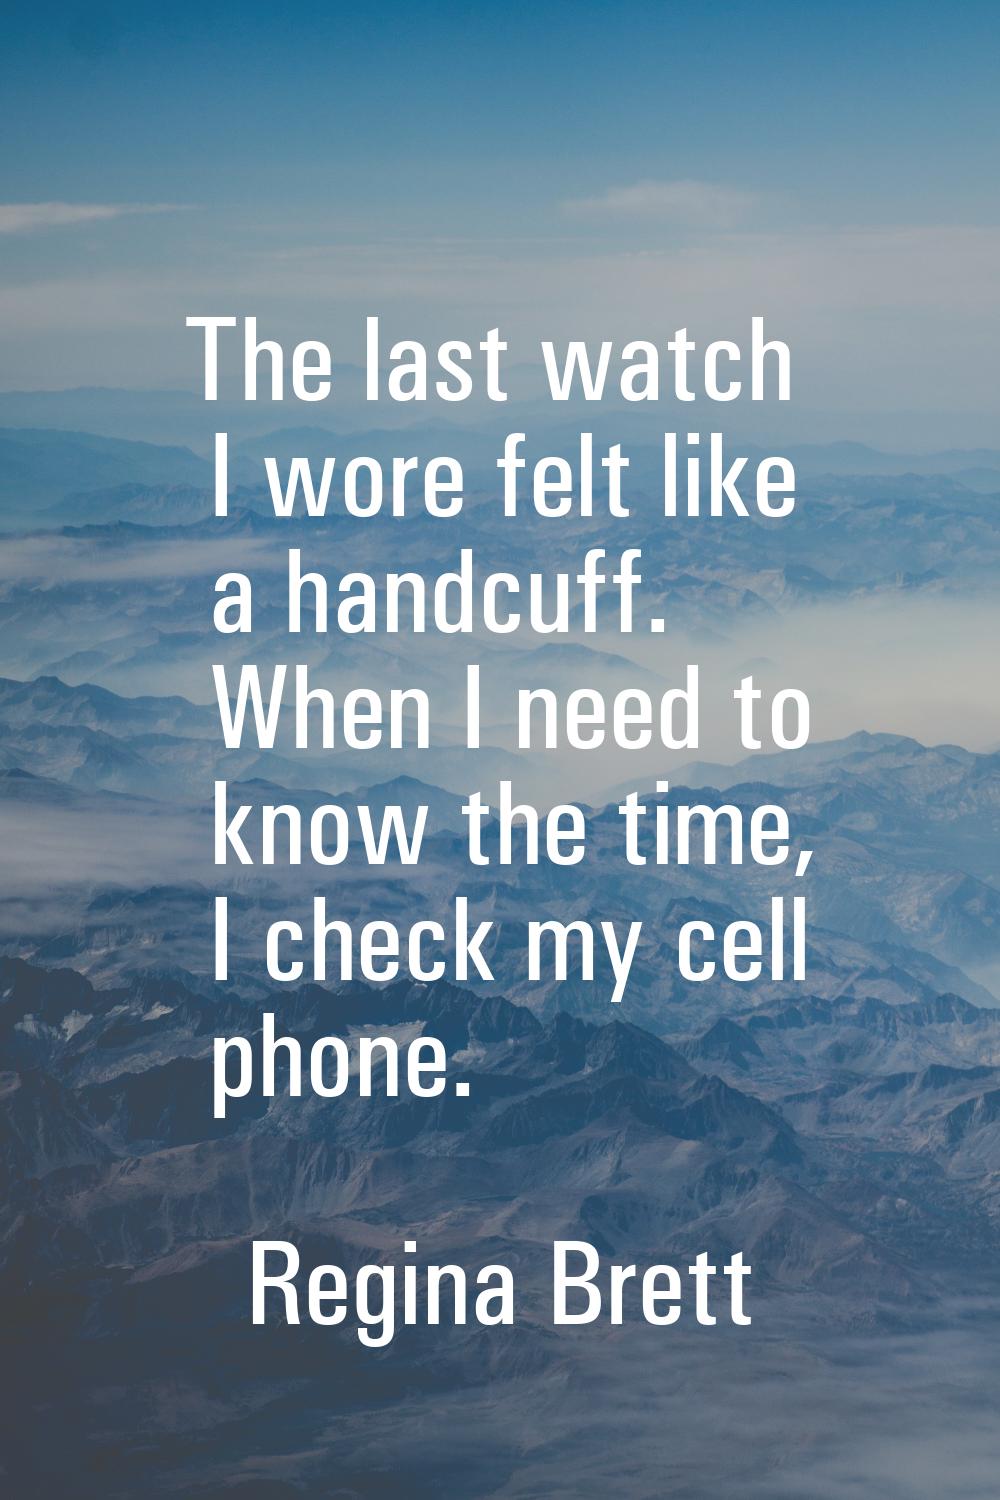 The last watch I wore felt like a handcuff. When I need to know the time, I check my cell phone.